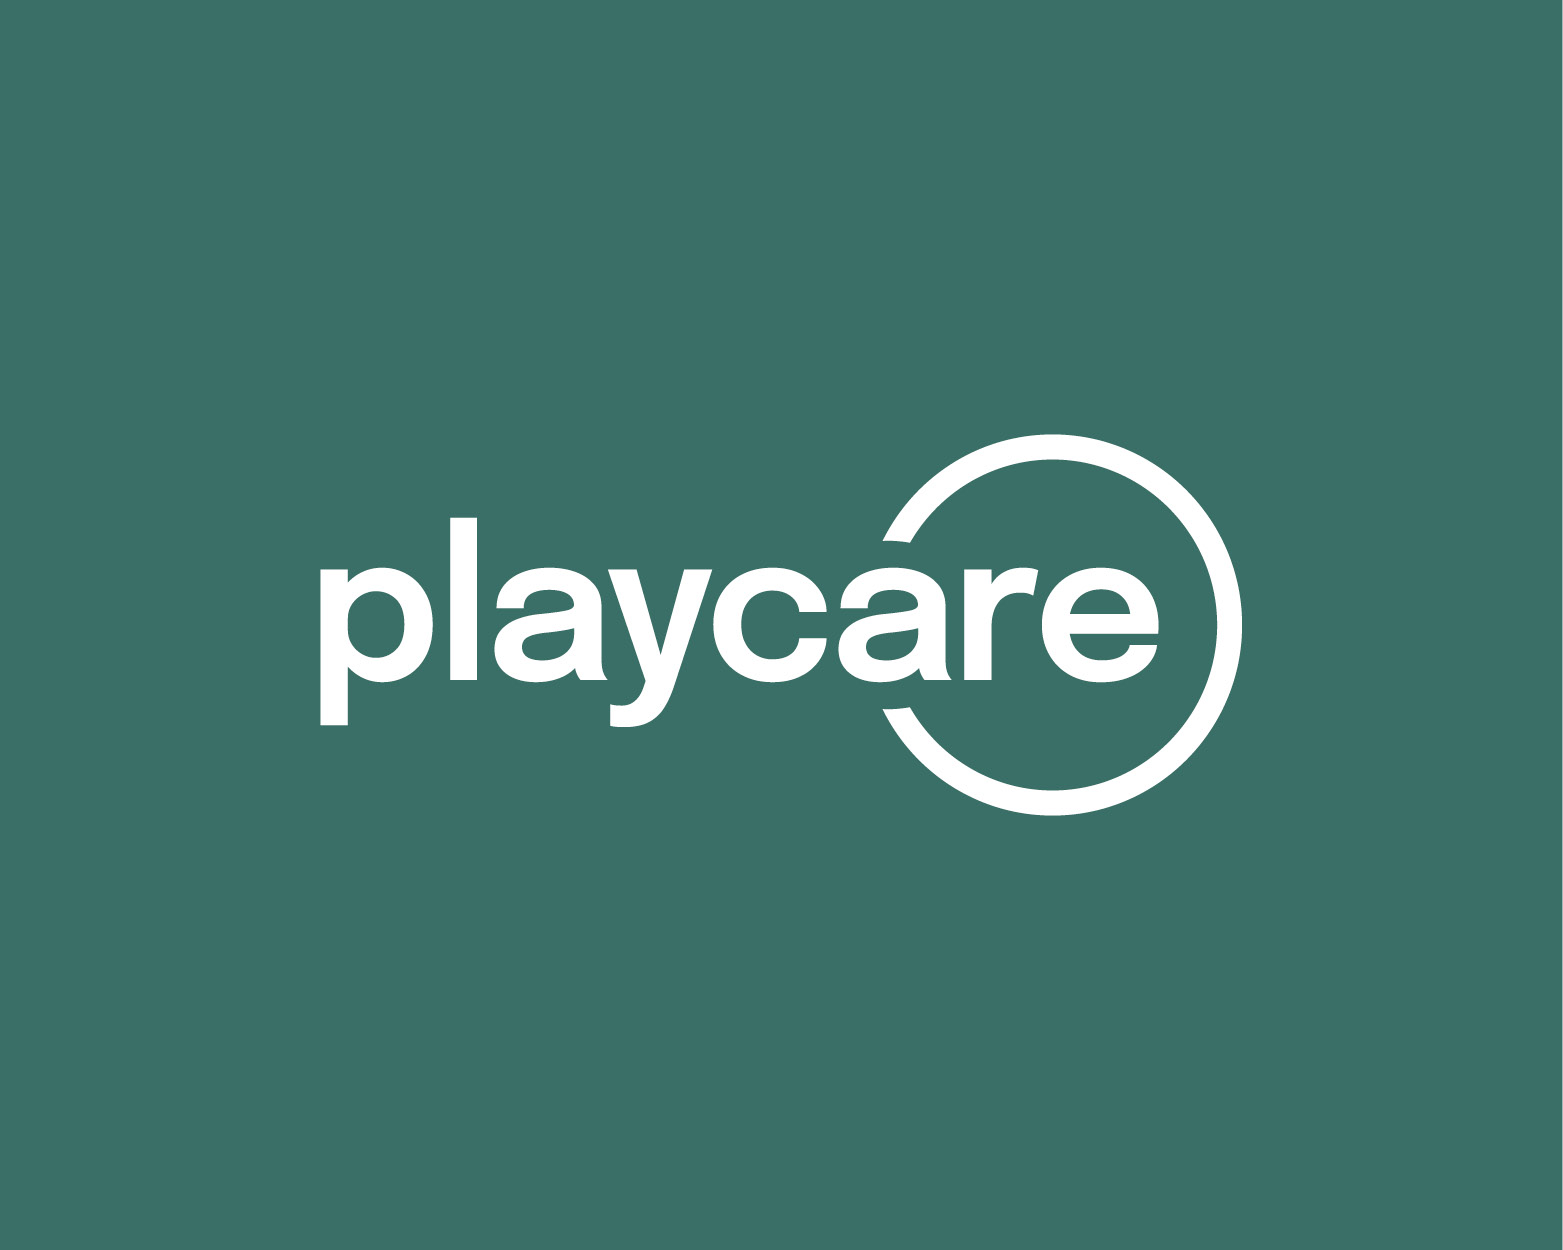 Playcare color